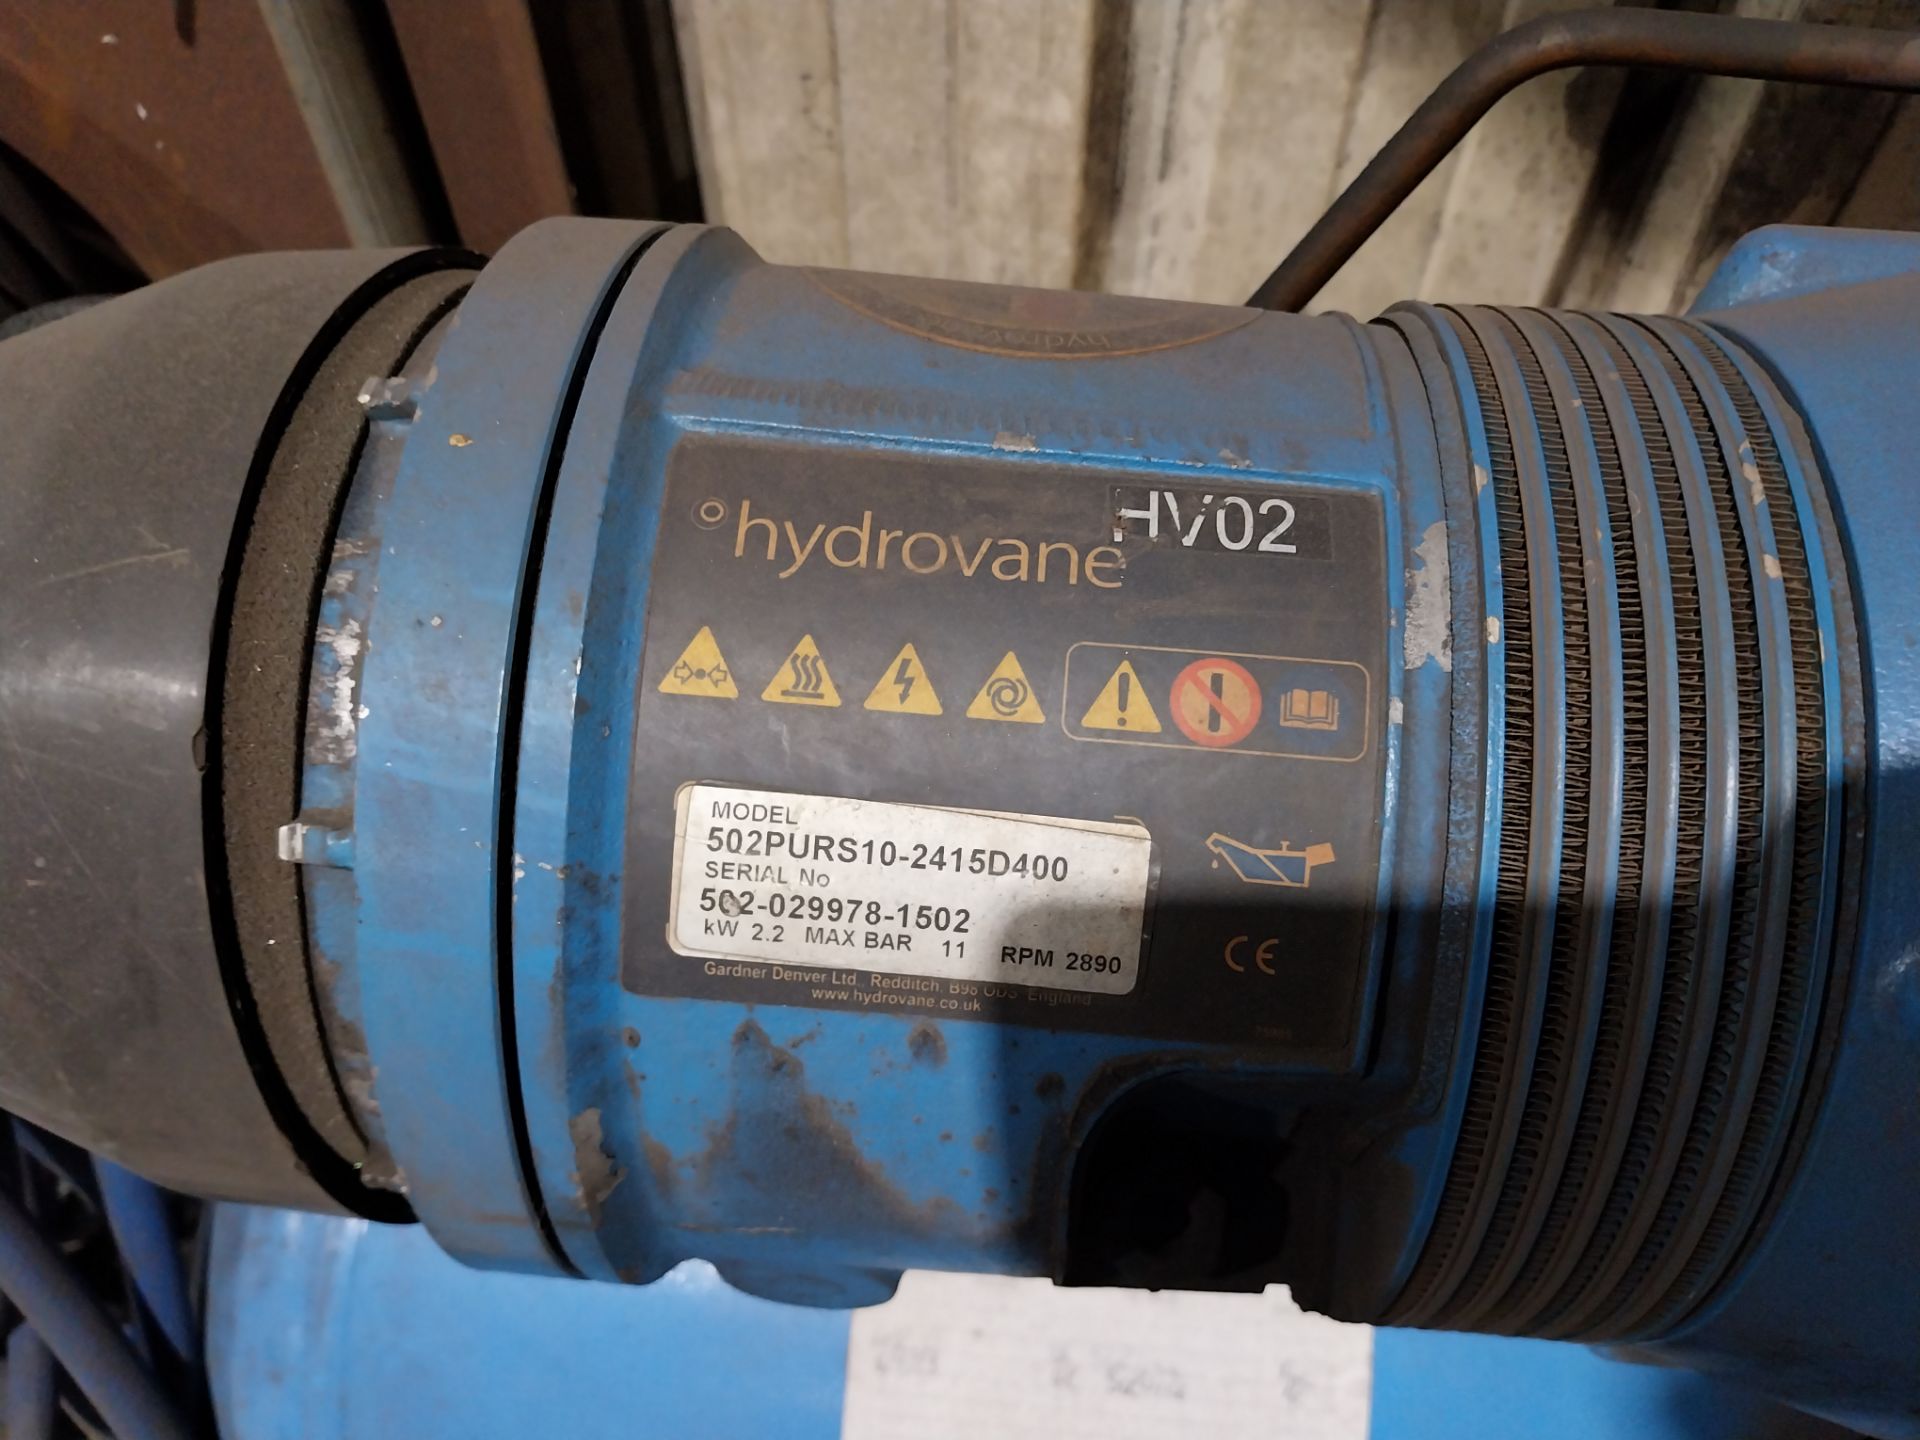 Hydrovane HV02 receiver mounted compressor, Model S02PUR510-2415D400, 2.2kw, max bar 11, RPM 2890, - Image 2 of 4